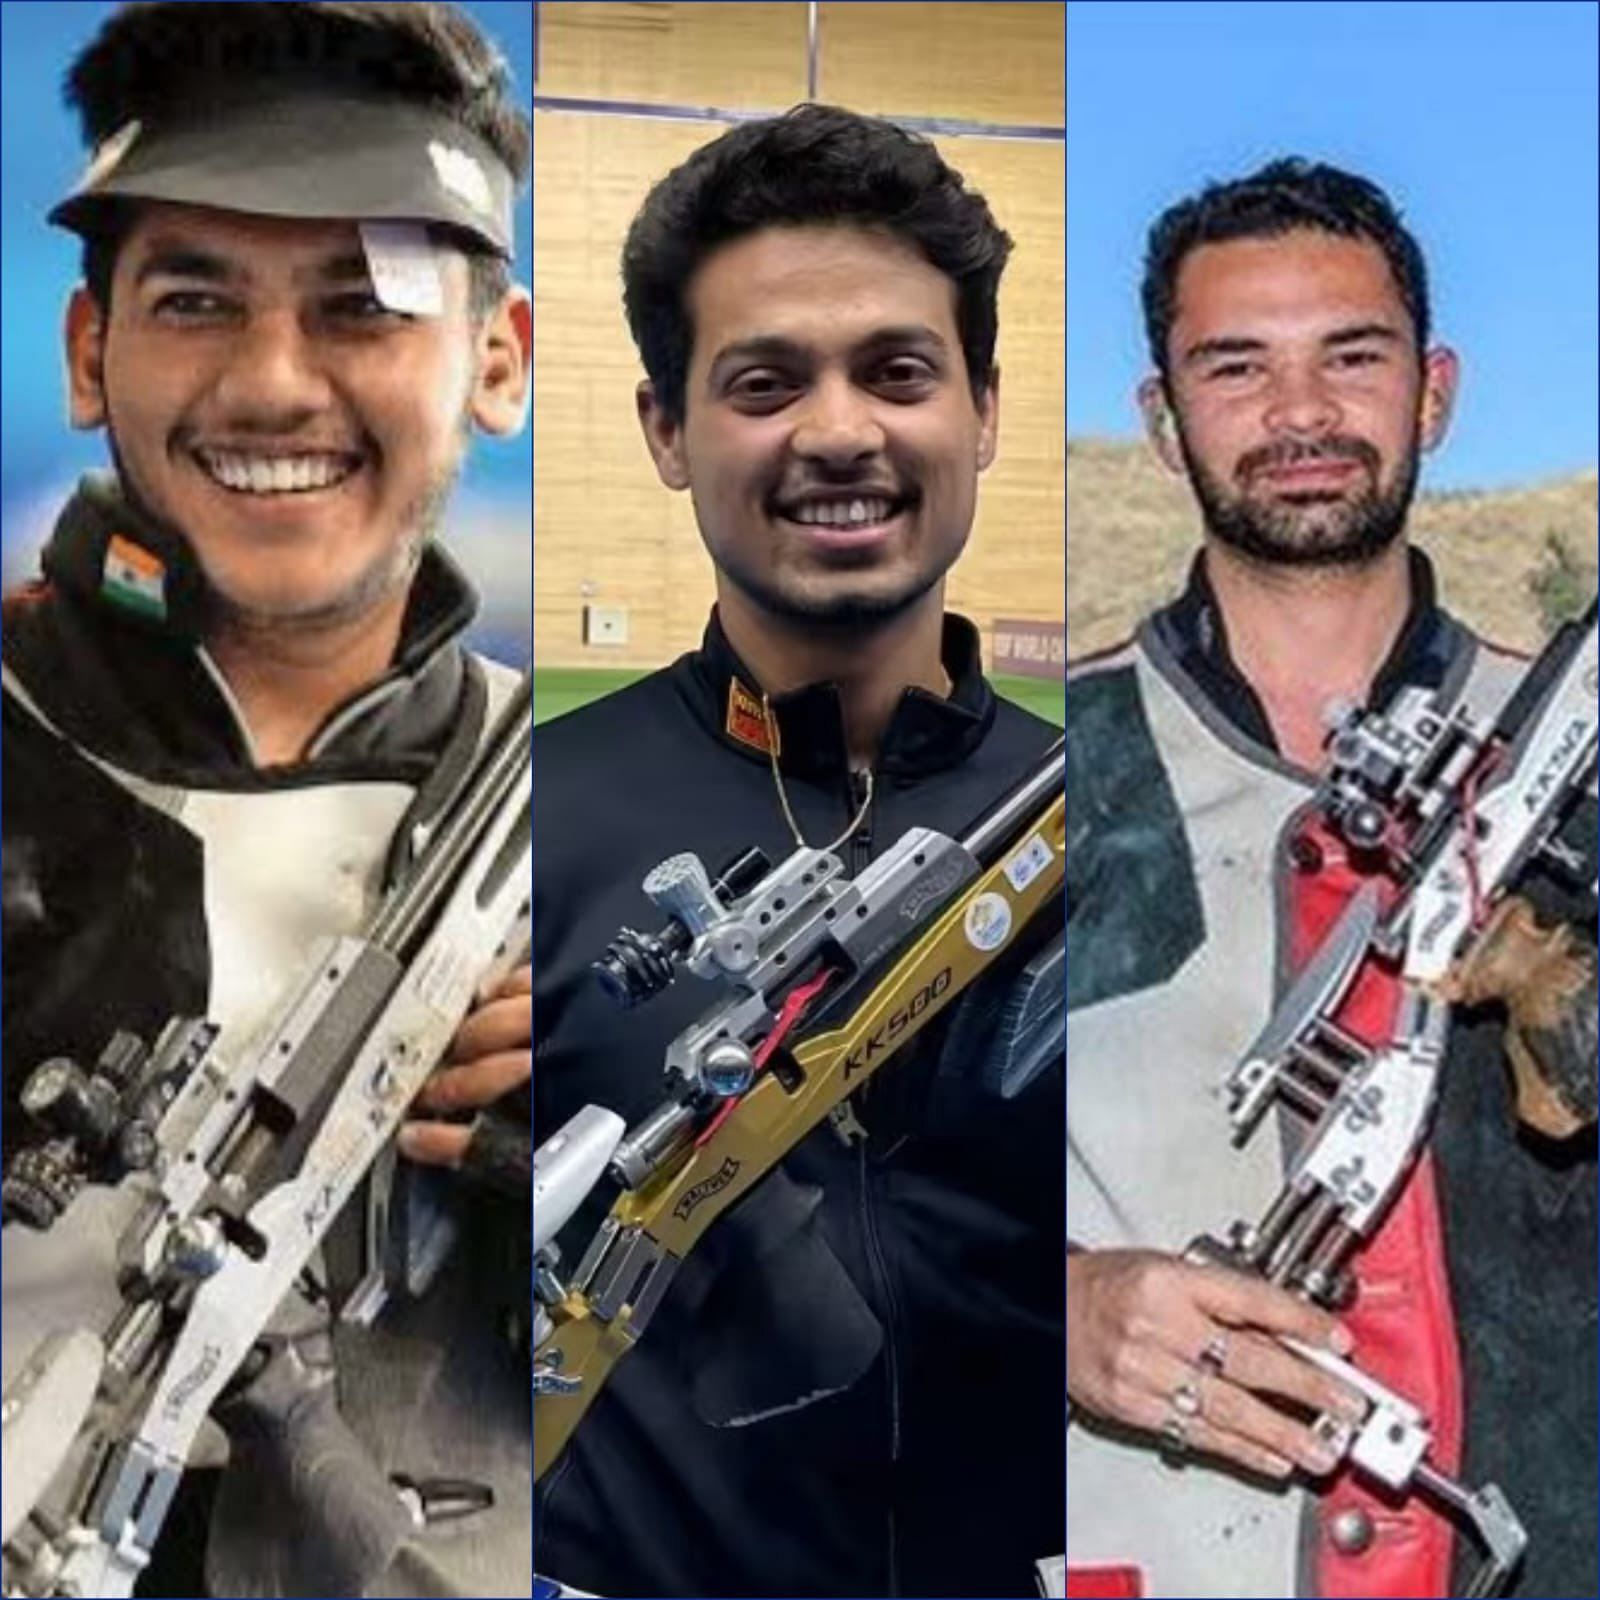 World Record Holders in 50 meter rifle team from left to right-Aishwary Pratap Singh Tomar,Swapnil Kusale and Akhil Sheoran 